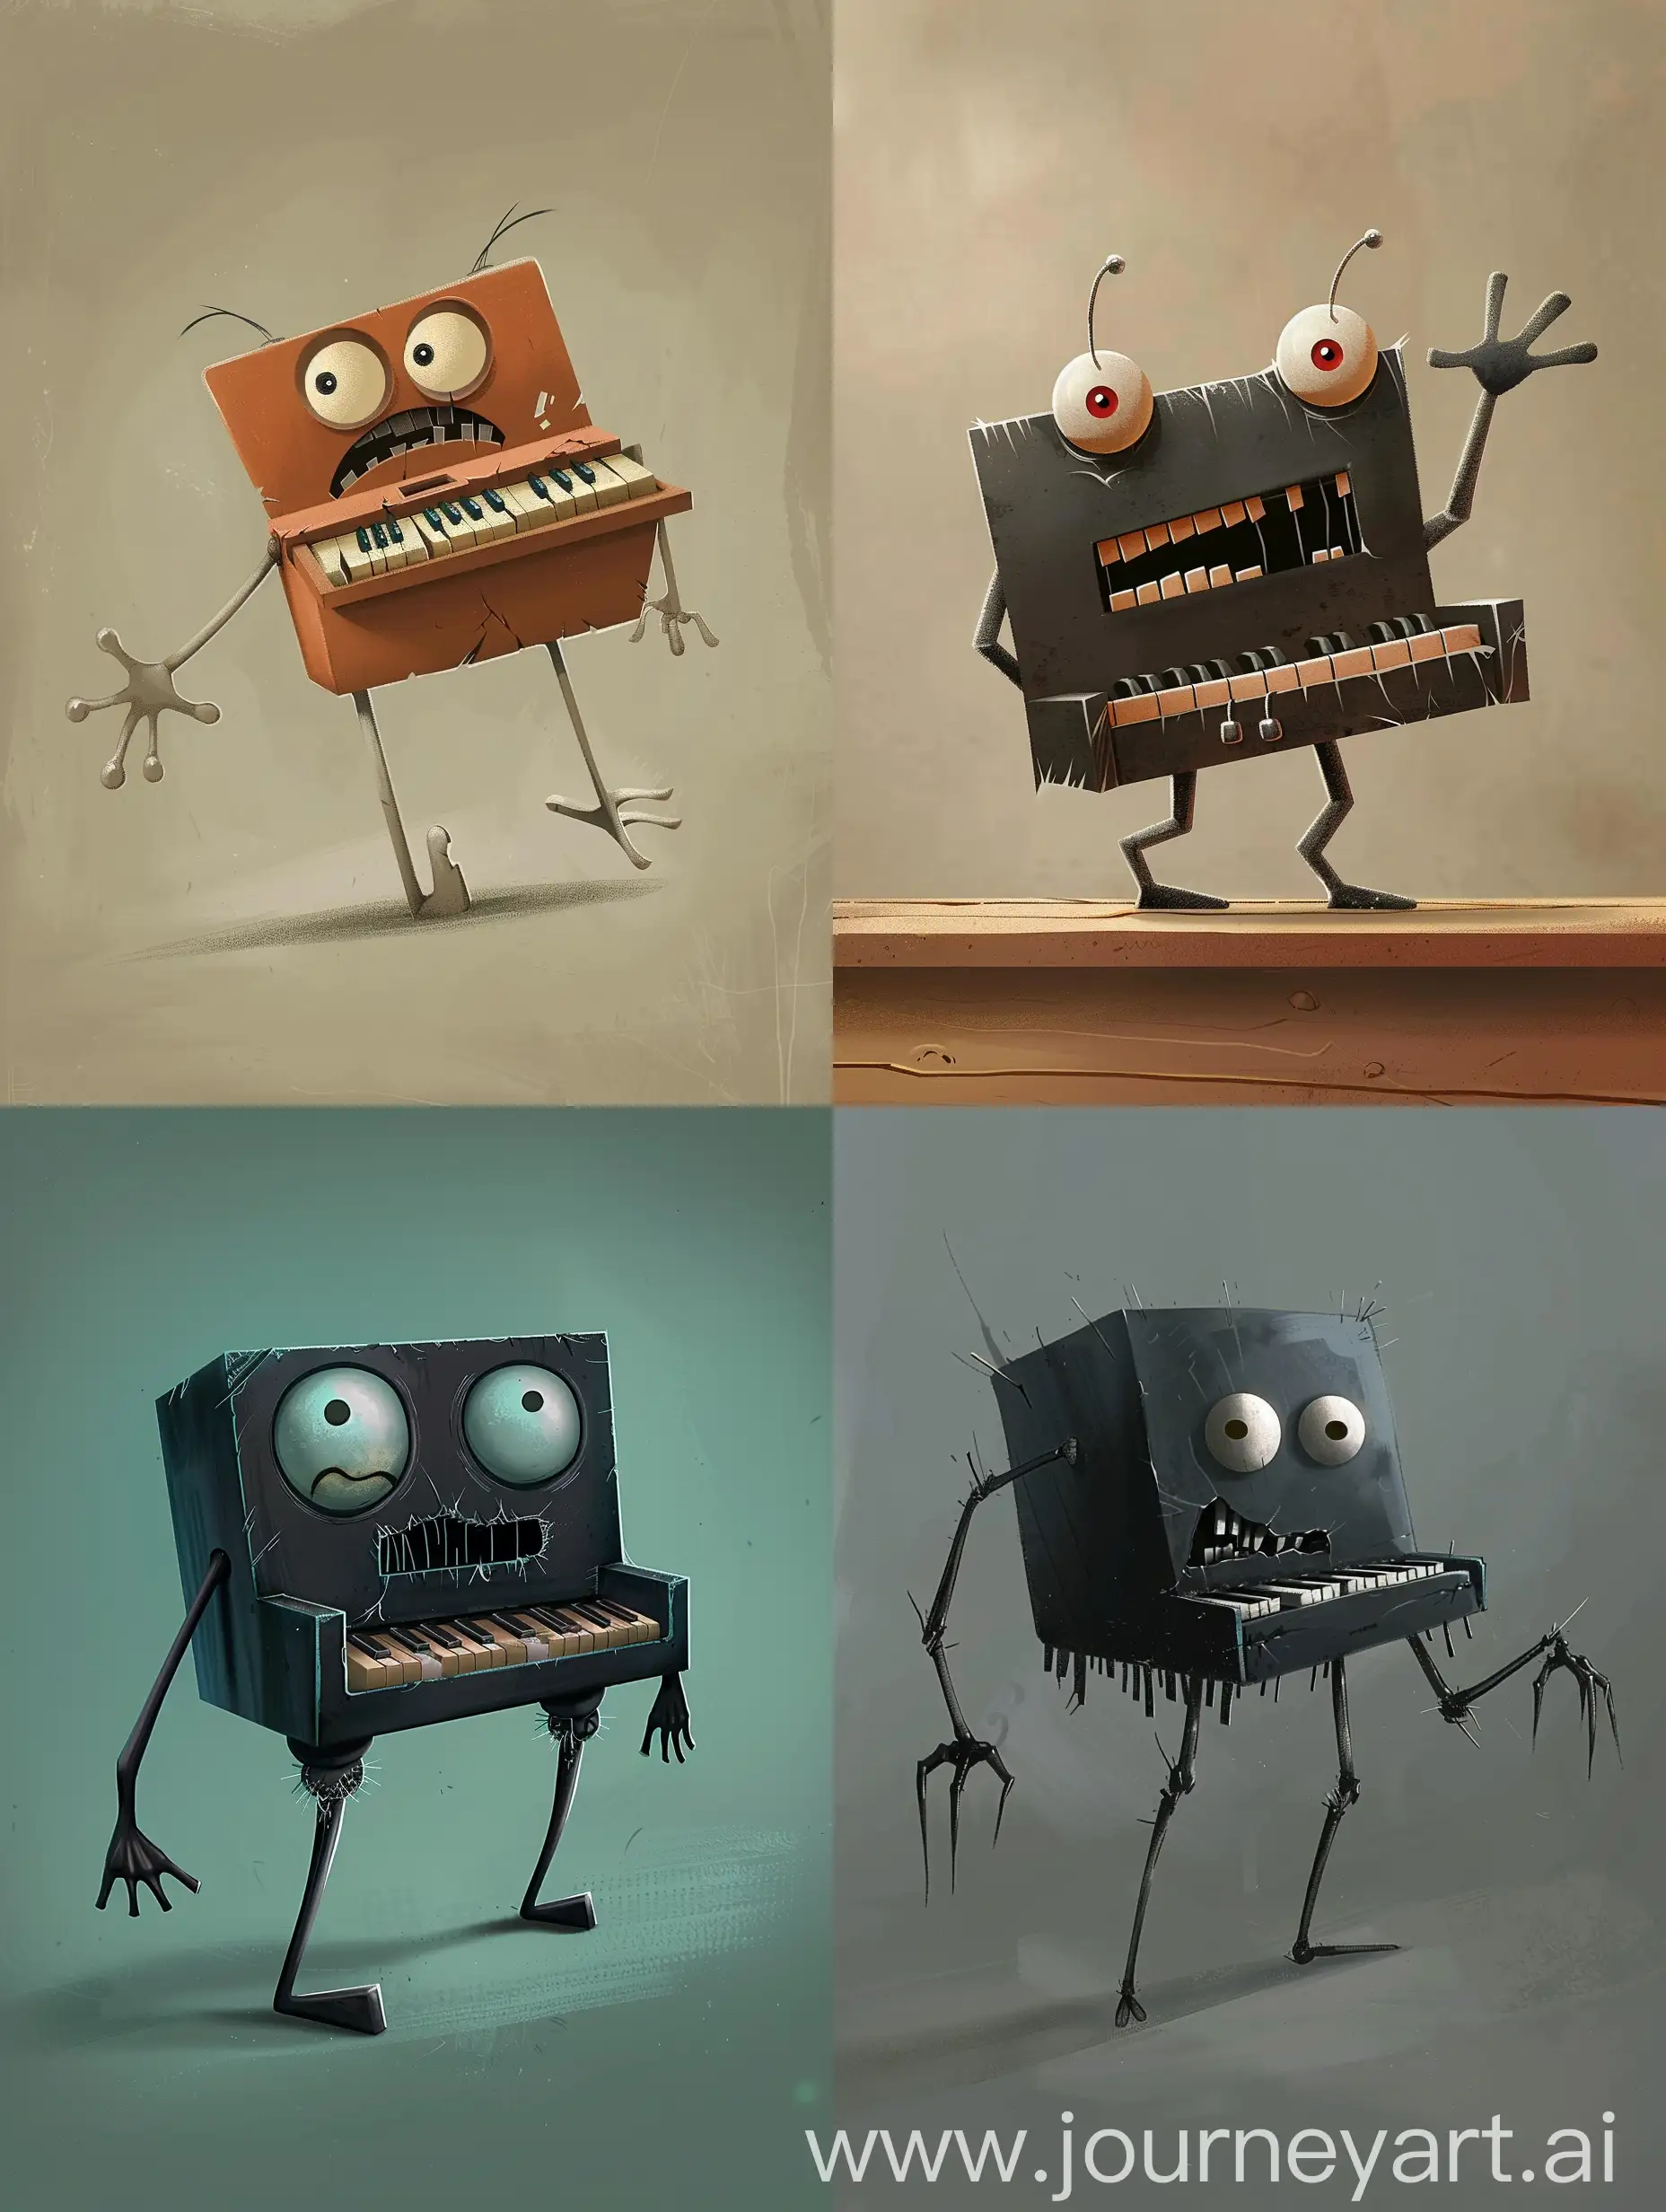 Whimsical-Animated-Character-Design-Little-Piano-with-Broken-Keys-and-Expressive-Eyes